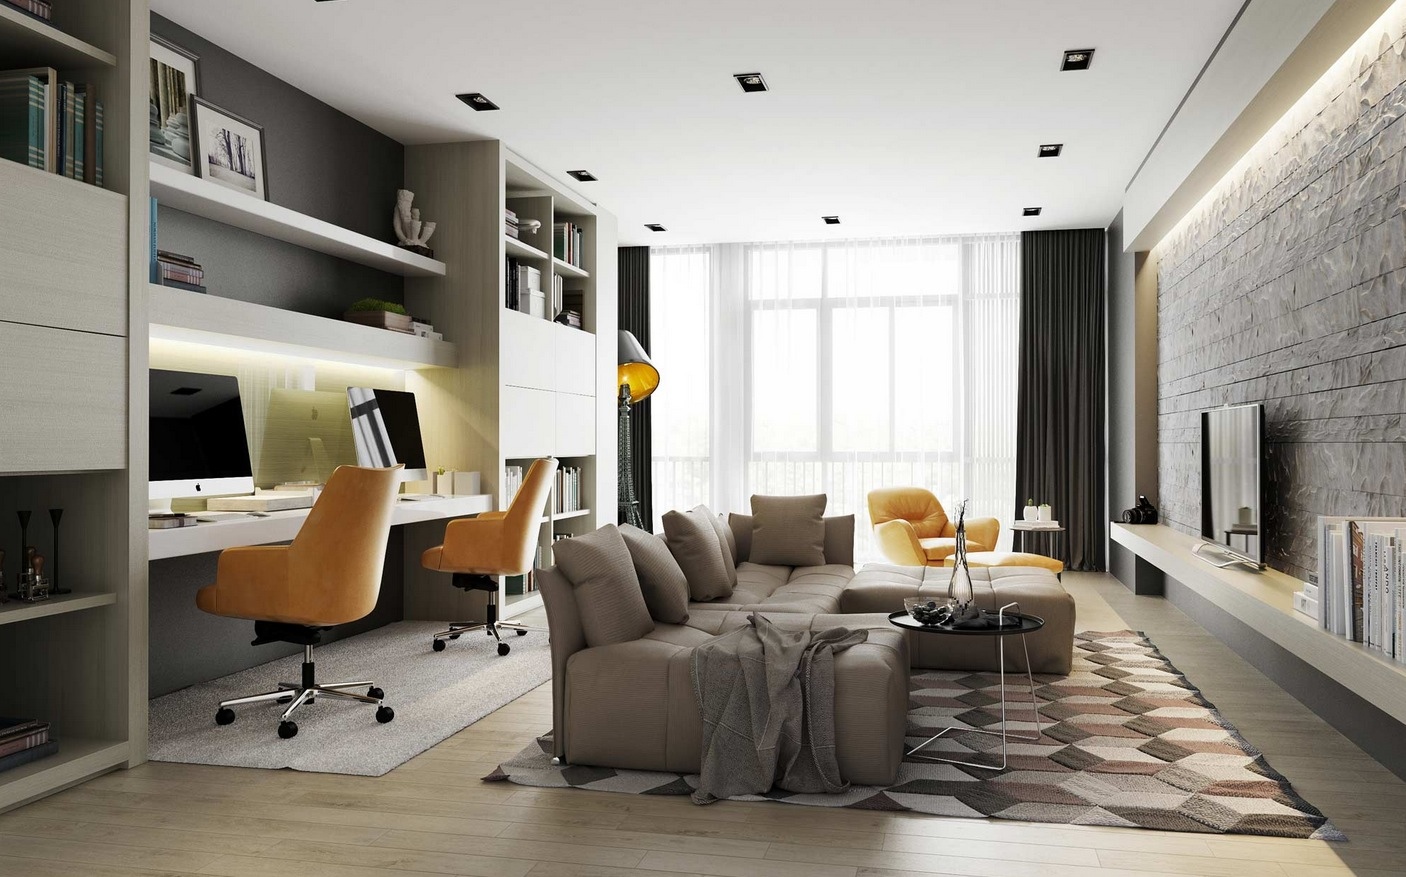 https://www.home-designing.com/wp-content/uploads/2022/12/yellow-accent-living-room.jpg